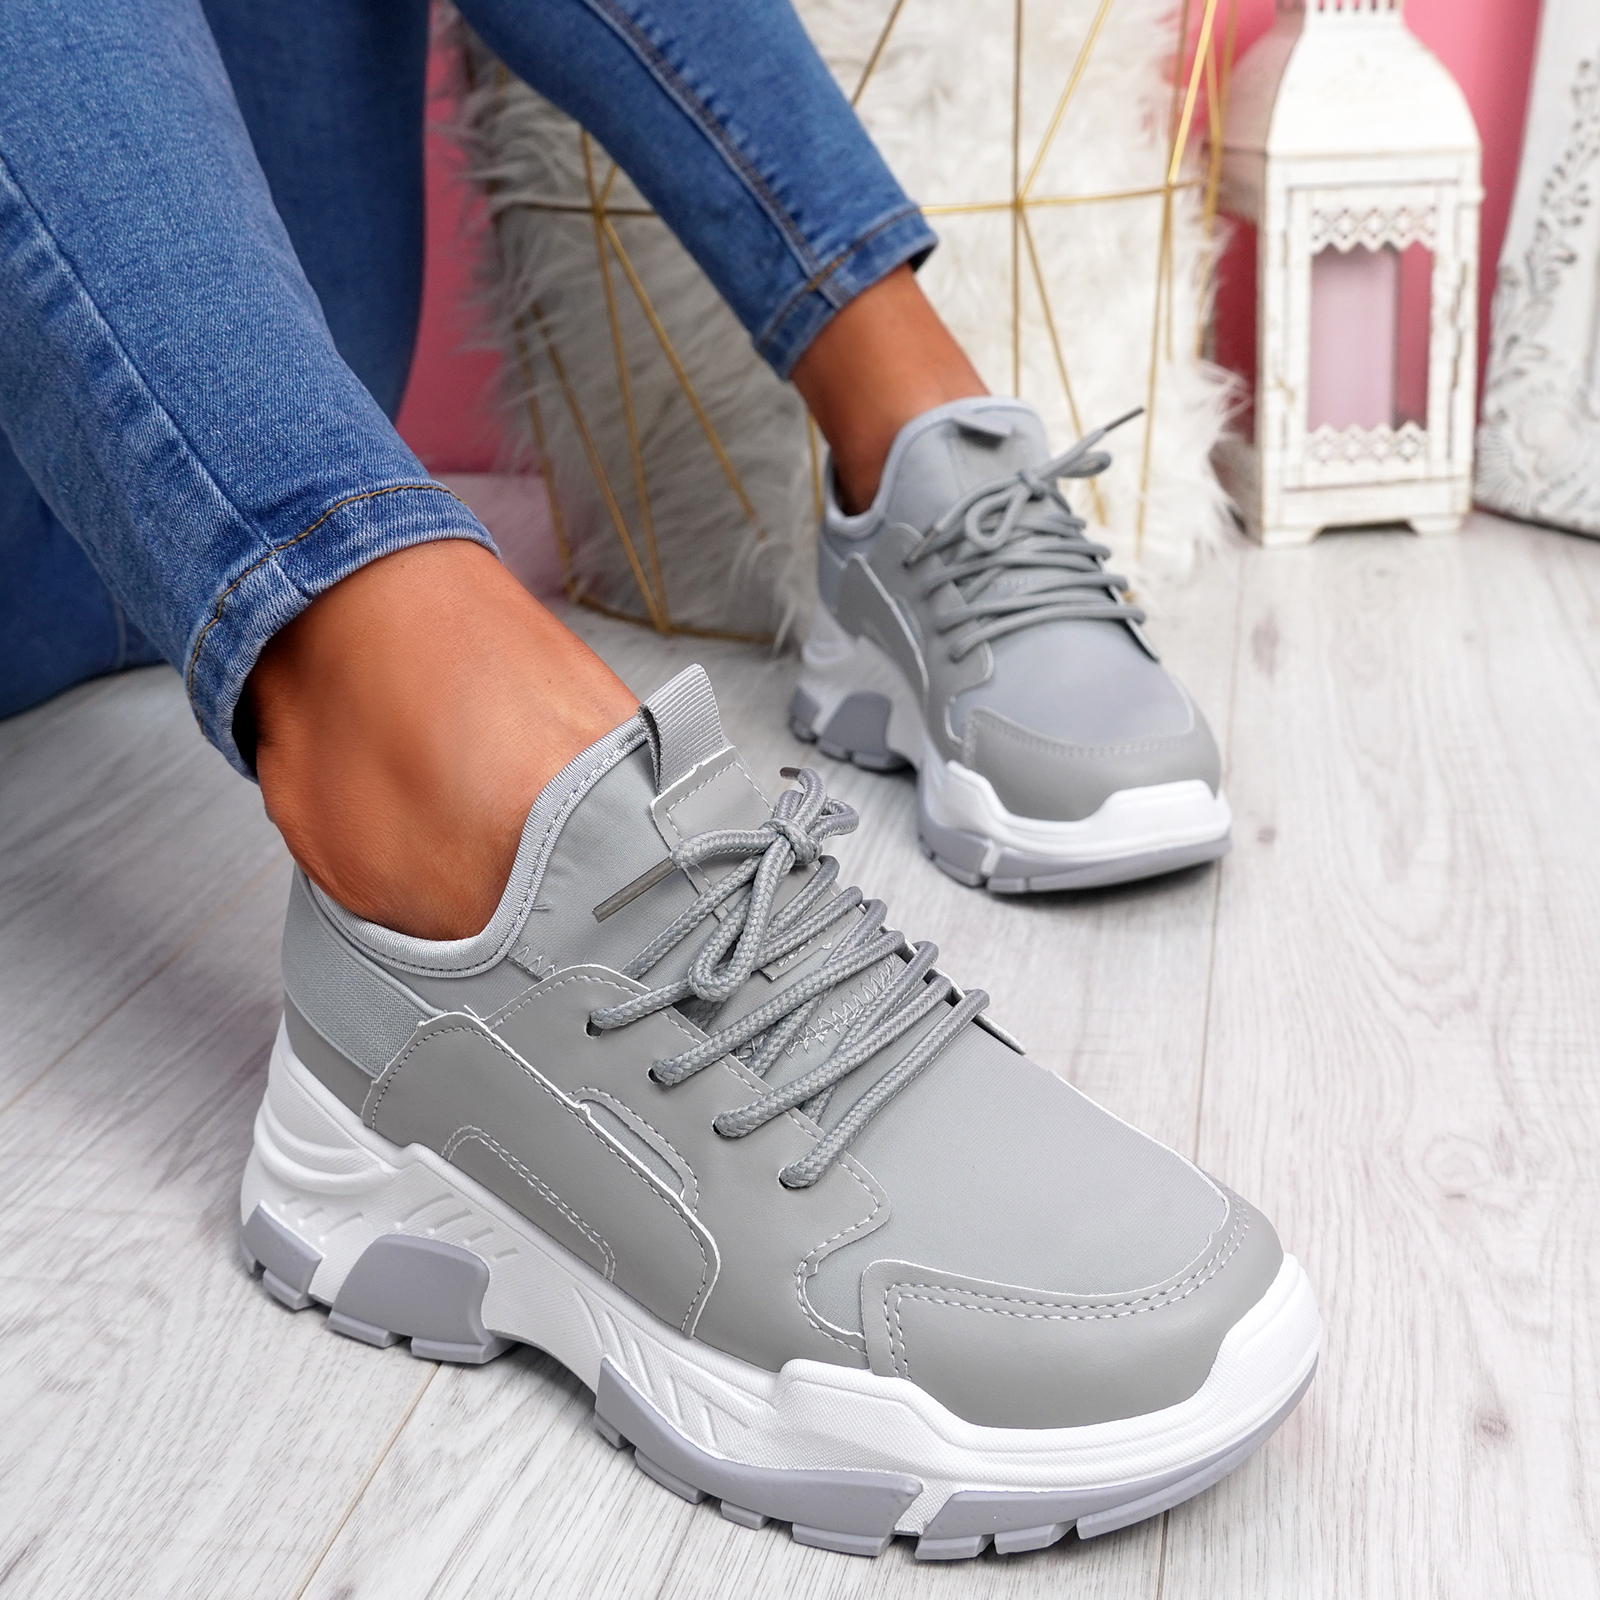 WOMENS LADIES SPORT CHUNKY TRAINERS LACE UP PARTY WOMEN SHOES SIZE UK ...